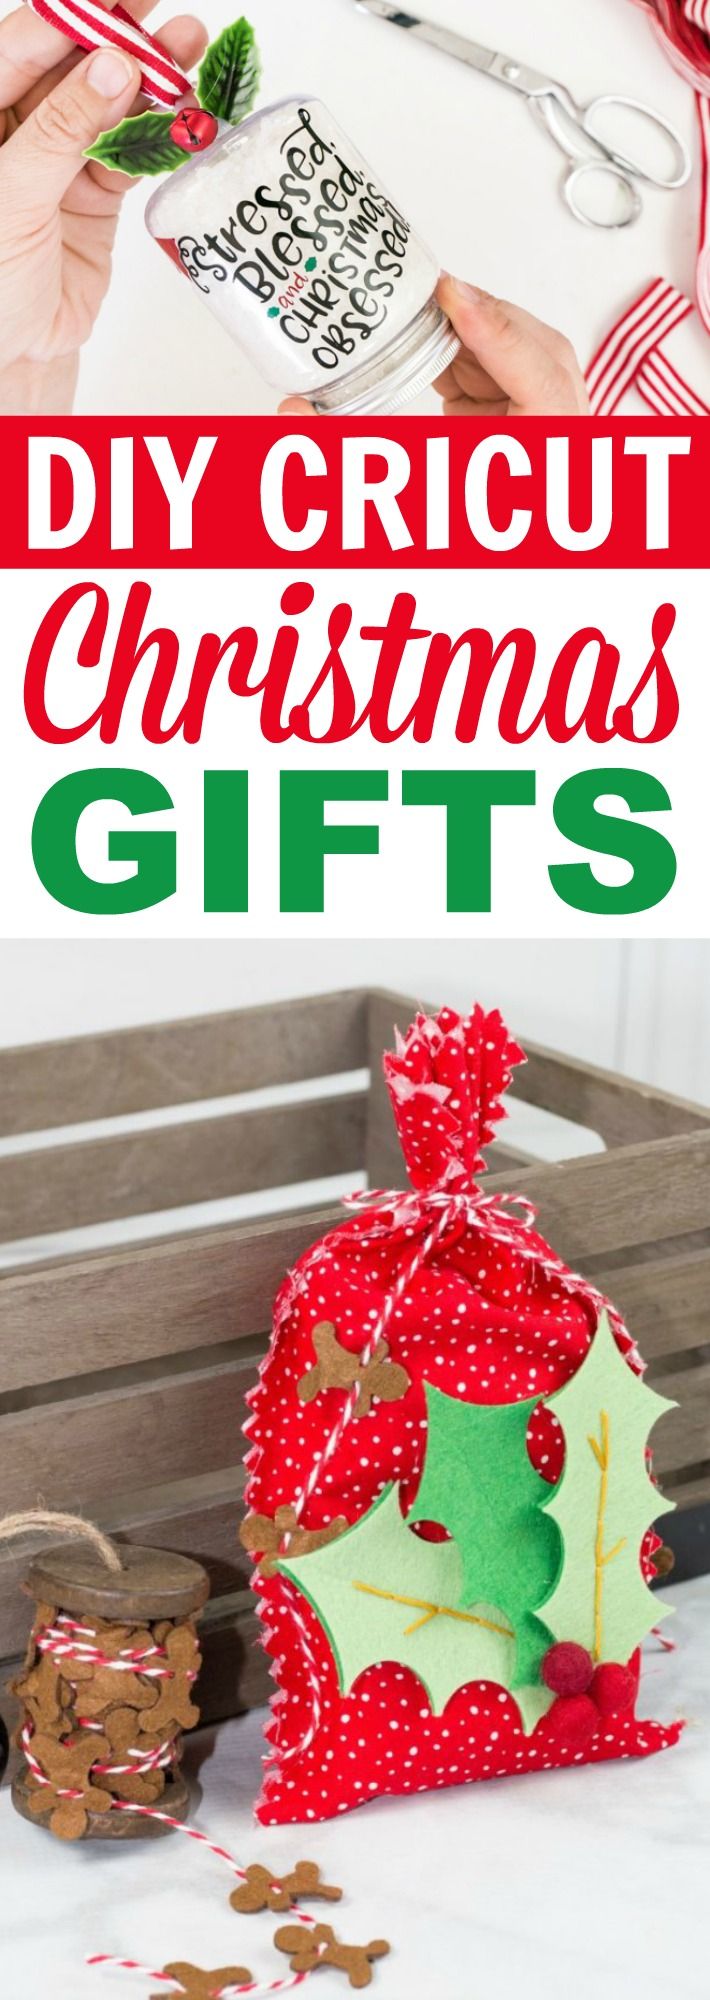 I love Christmas crafts and these DIY Cricut Christmas Gifts are perfect to ma...